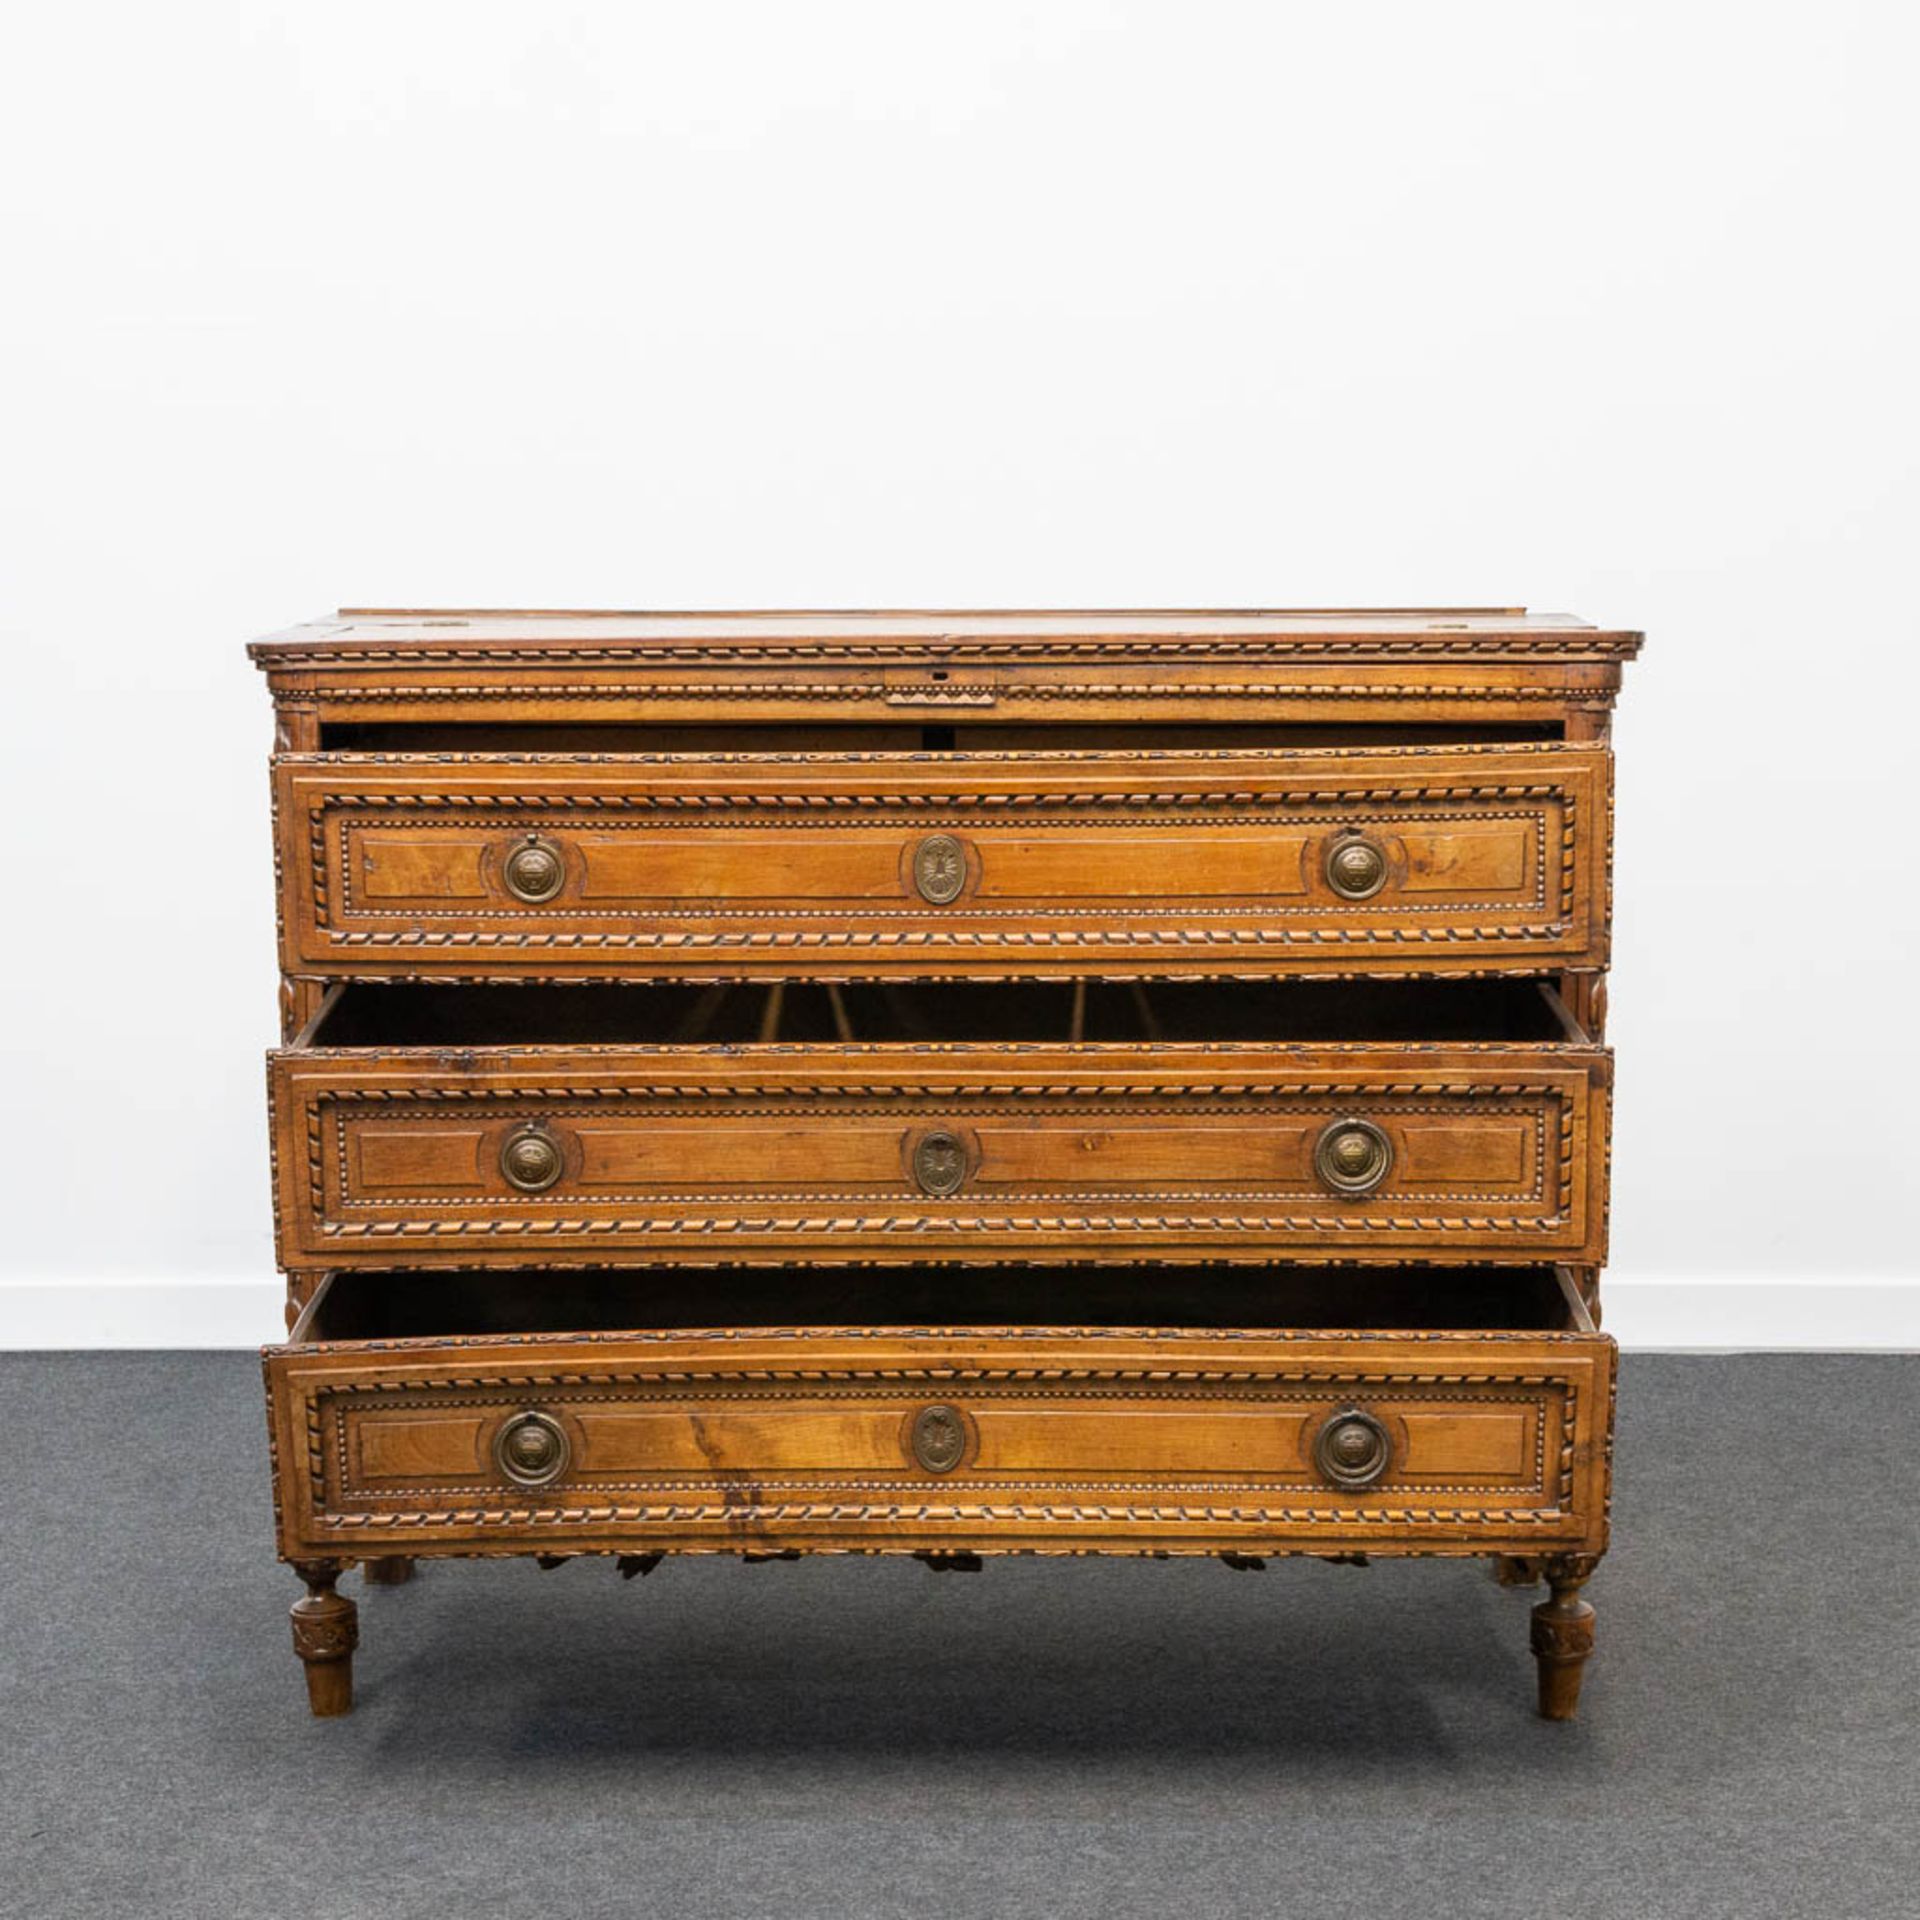 A wood sculptured commode in Louis XVI style, with 3 drawers and a hidden desk. 18th century. - Bild 2 aus 23